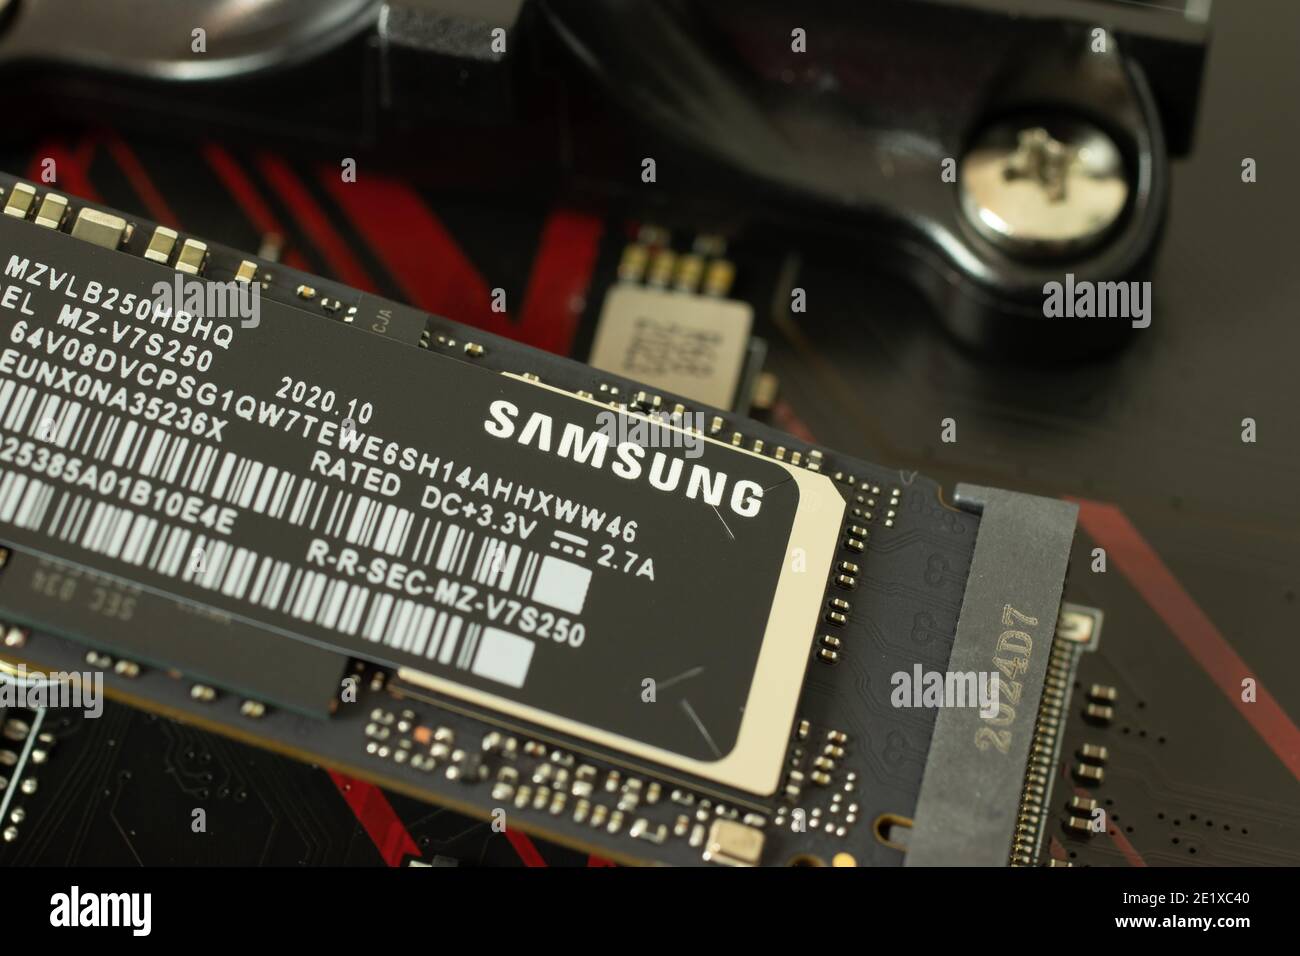 Moscow, Russia - 5 December 2020: Samsung M.2 slot SSD memory macro photo in motherboard, Illustrative Editorial. Stock Photo